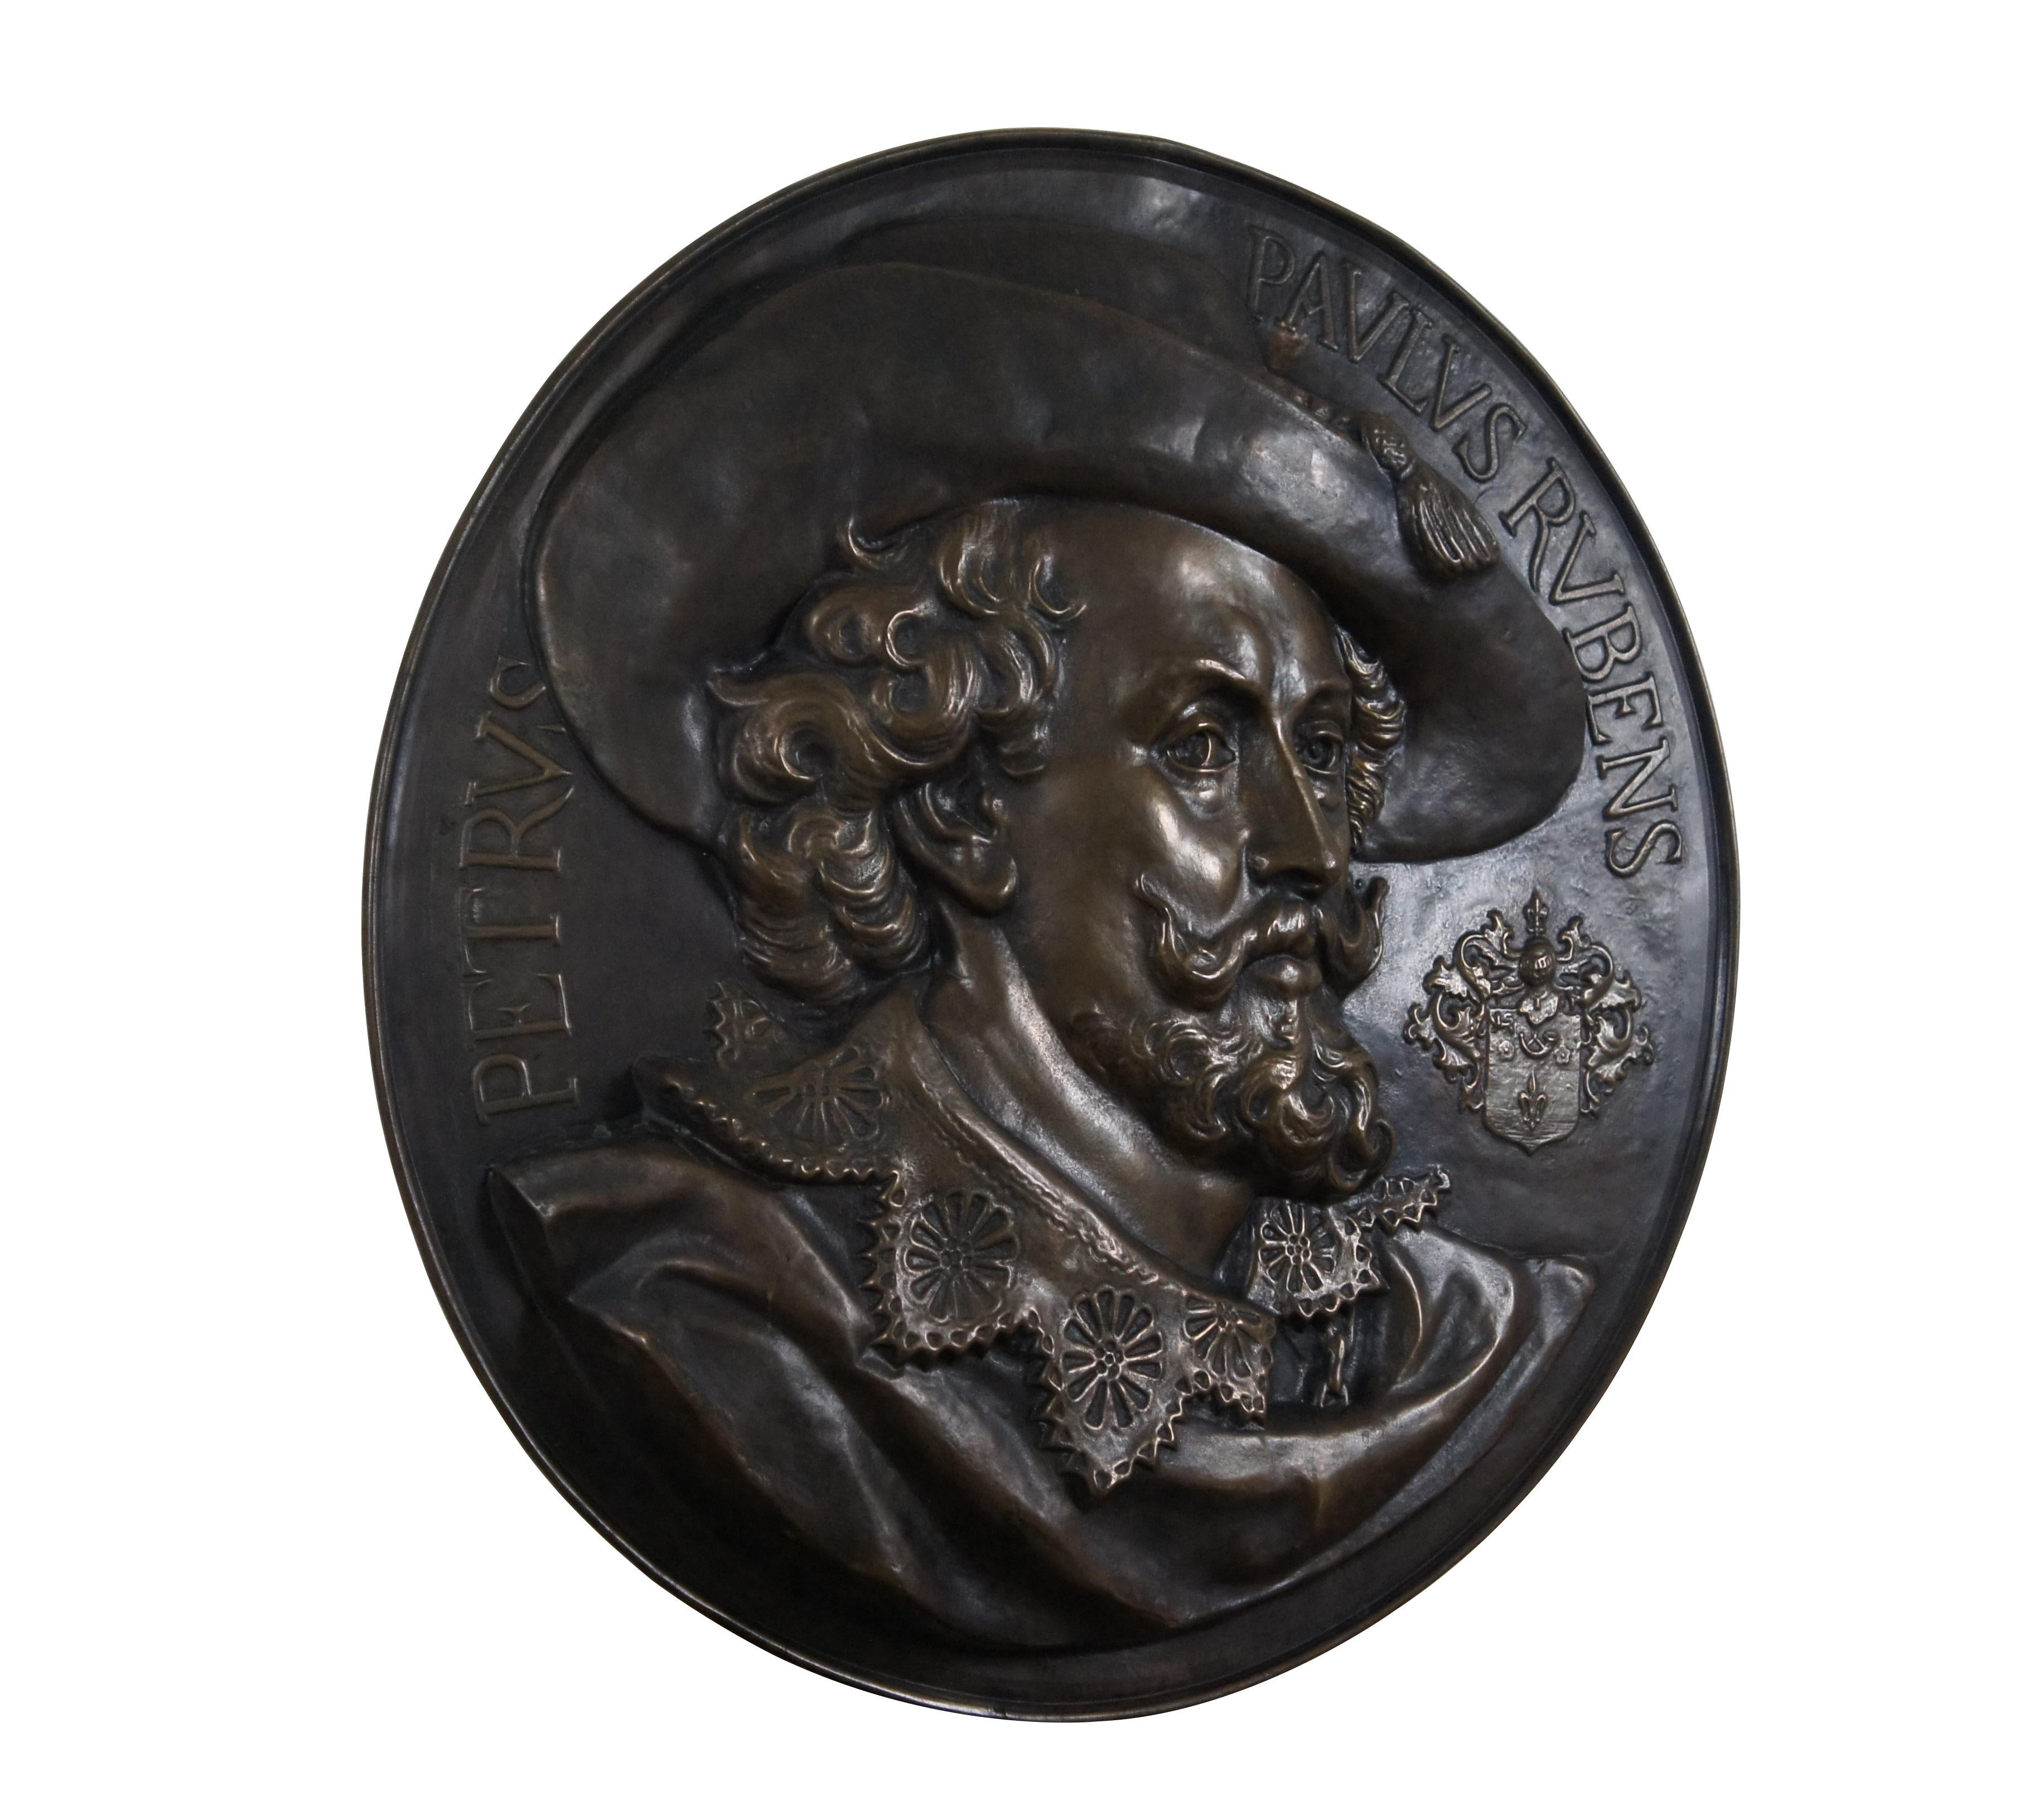 Early 20th century embossed copper wall hanging bust portrait plaque featuring a portrait of Flemish artist Peter Paul Rubens, framed by his name in Latin and accented with a coat of arms.

